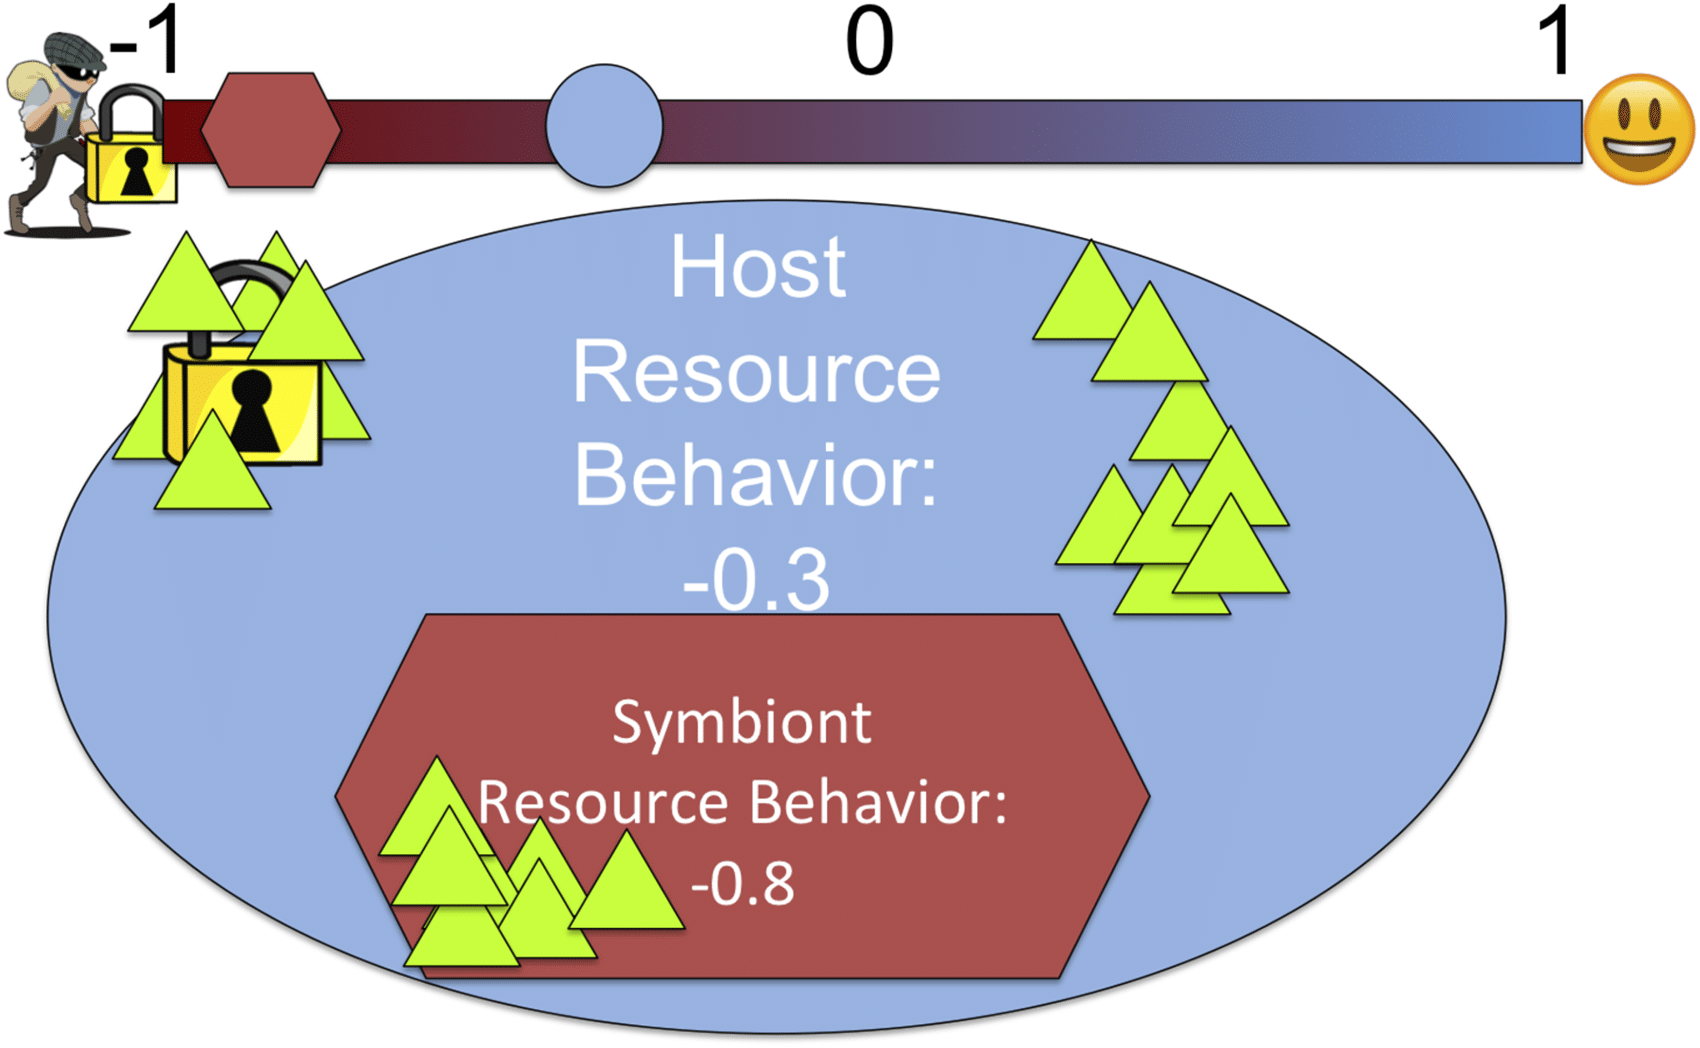 The image depicts the Symbulation default system.